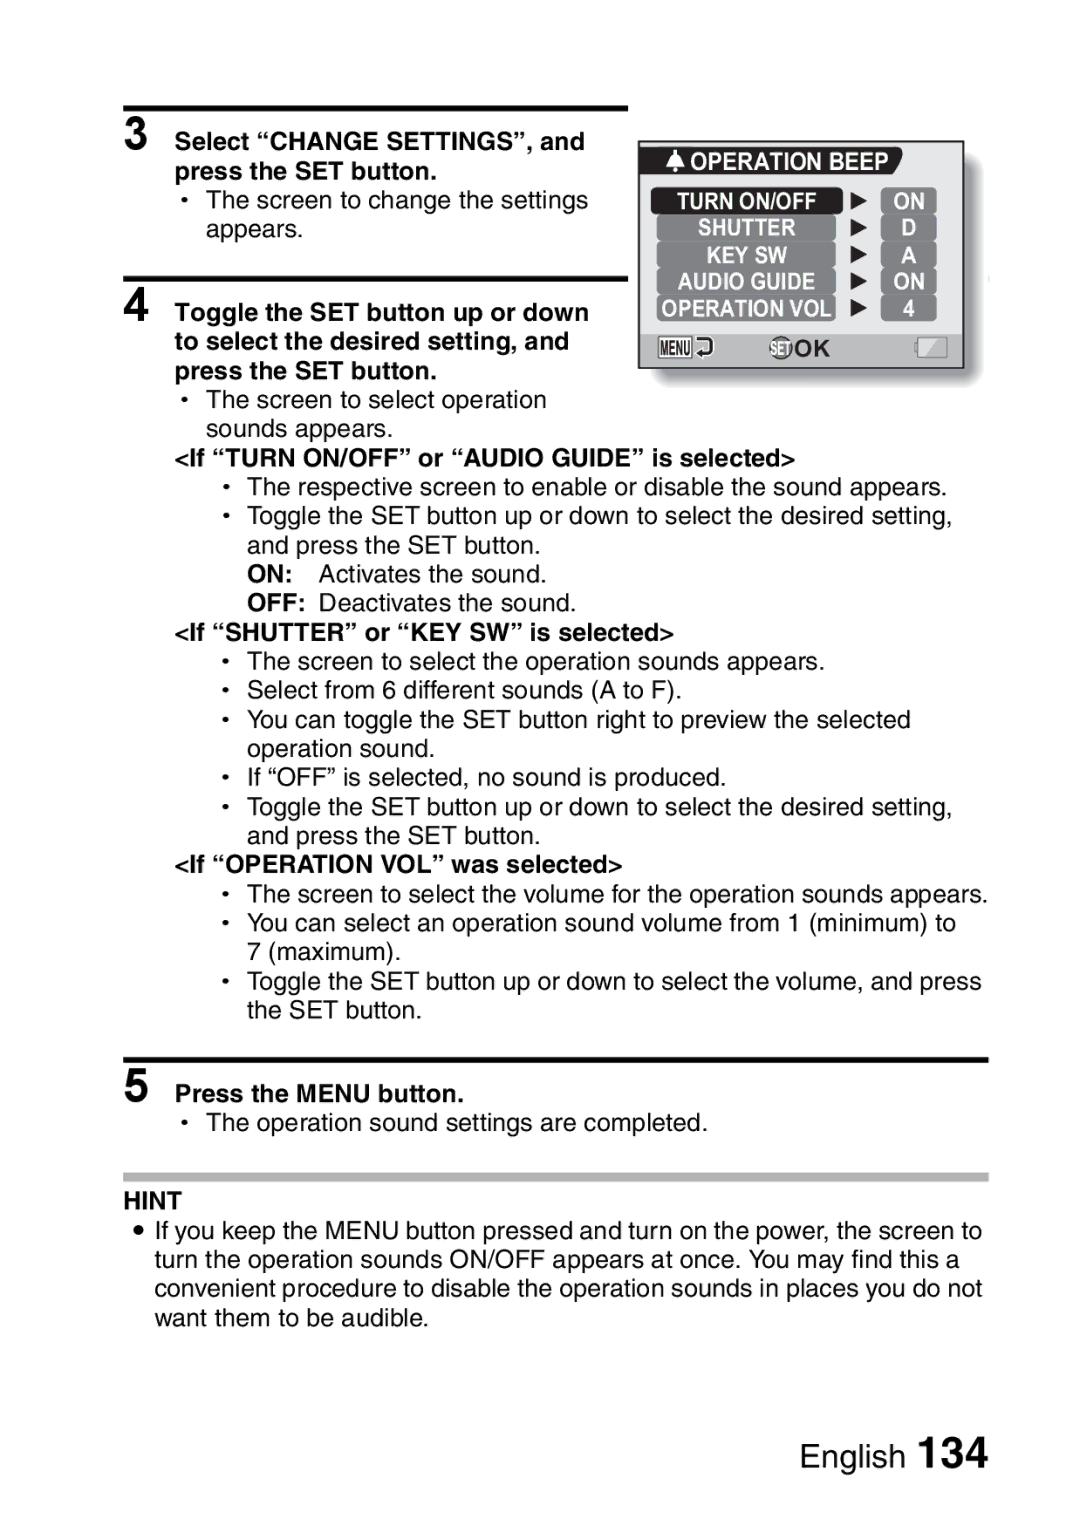 Sanyo VPC-HD2 If Turn ON/OFF or Audio Guide is selected, If Shutter or KEY SW is selected, If Operation VOL was selected 